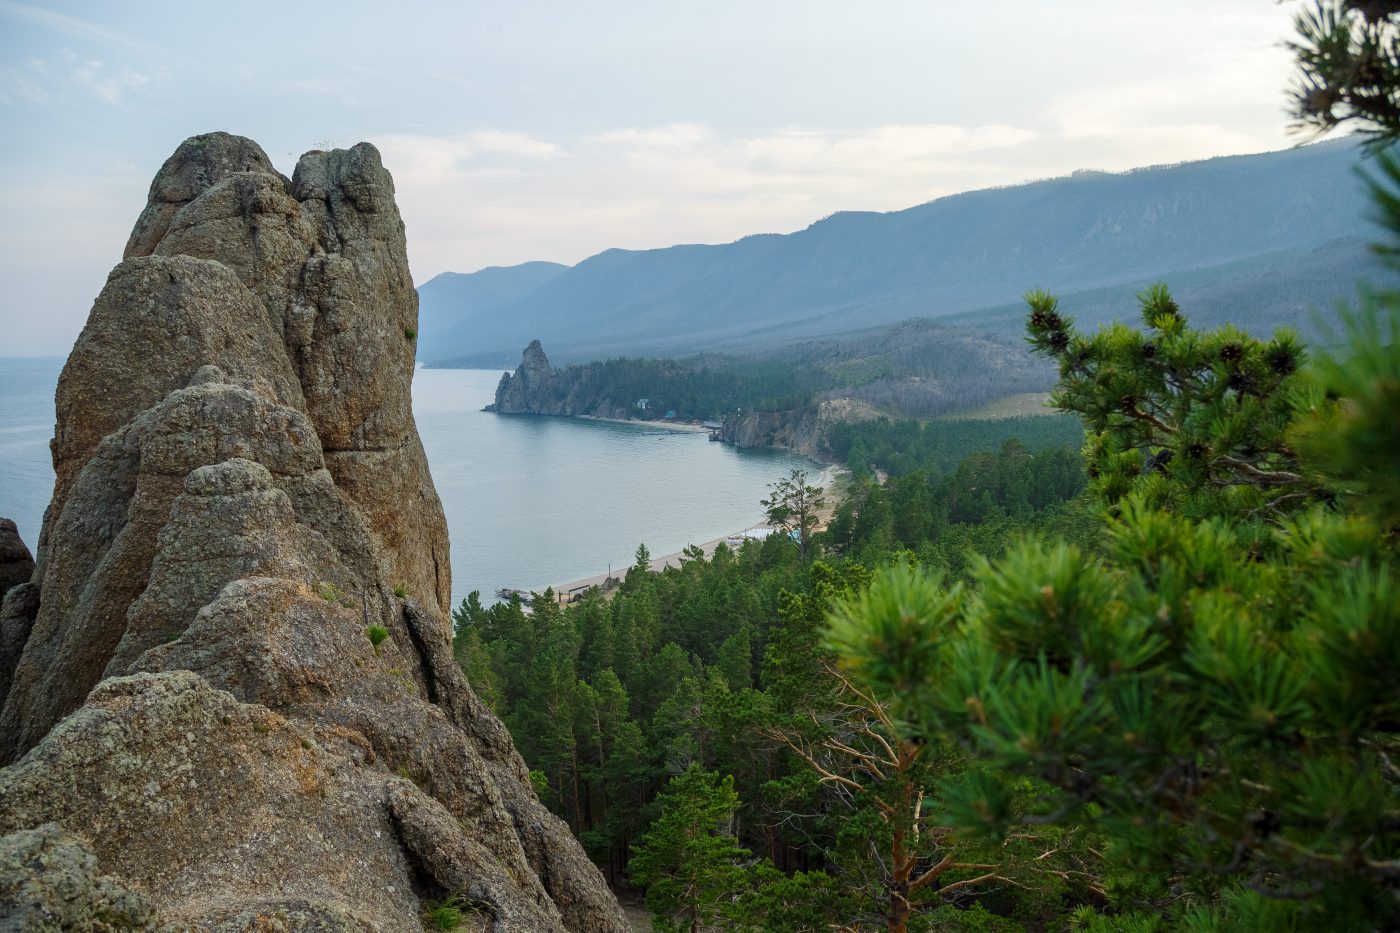 Preservation of forests in the Baikal region